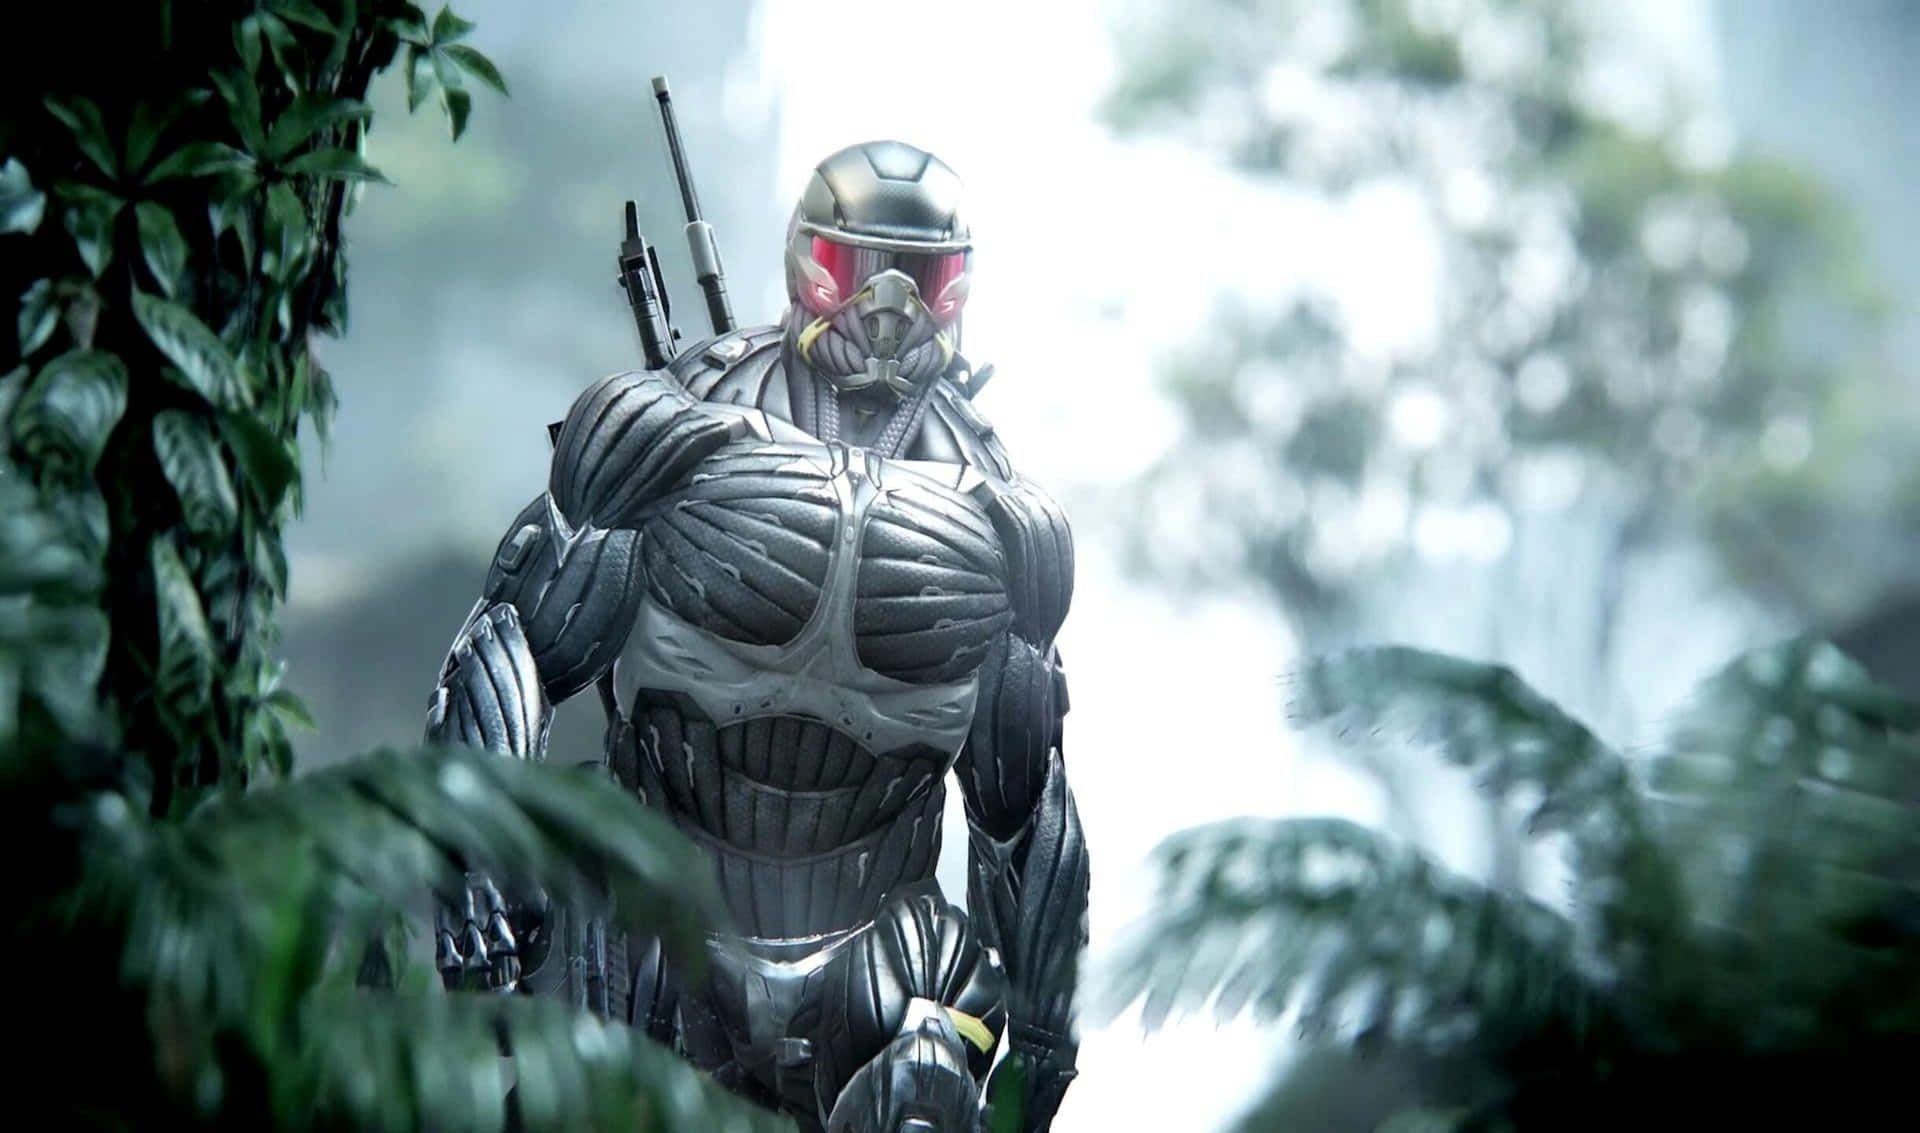 2440x1440 Crysis 3 Background Wallpaper